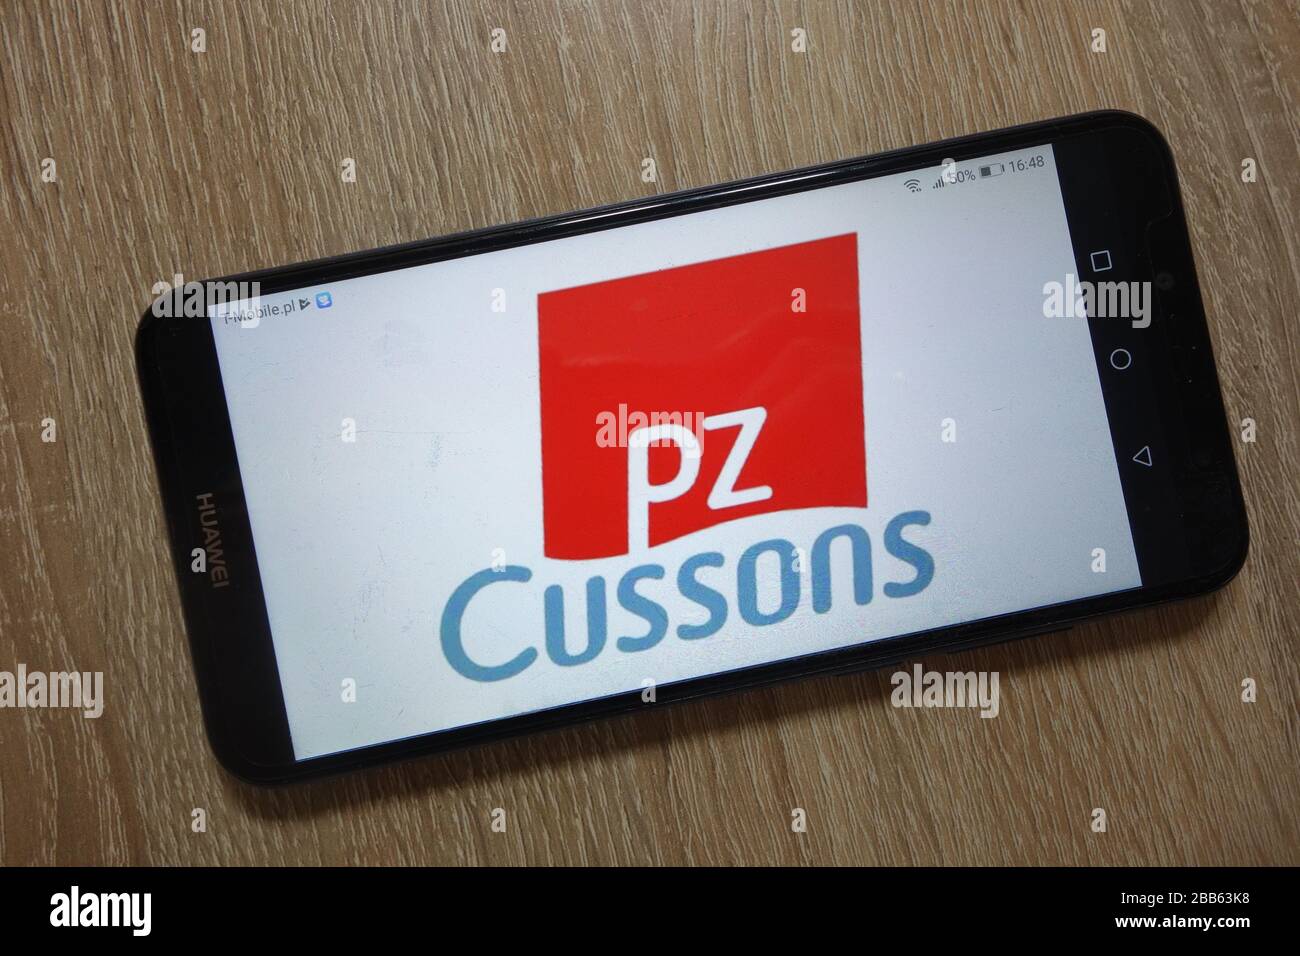 PZ Cussons logo displayed on smartphone Stock Photo